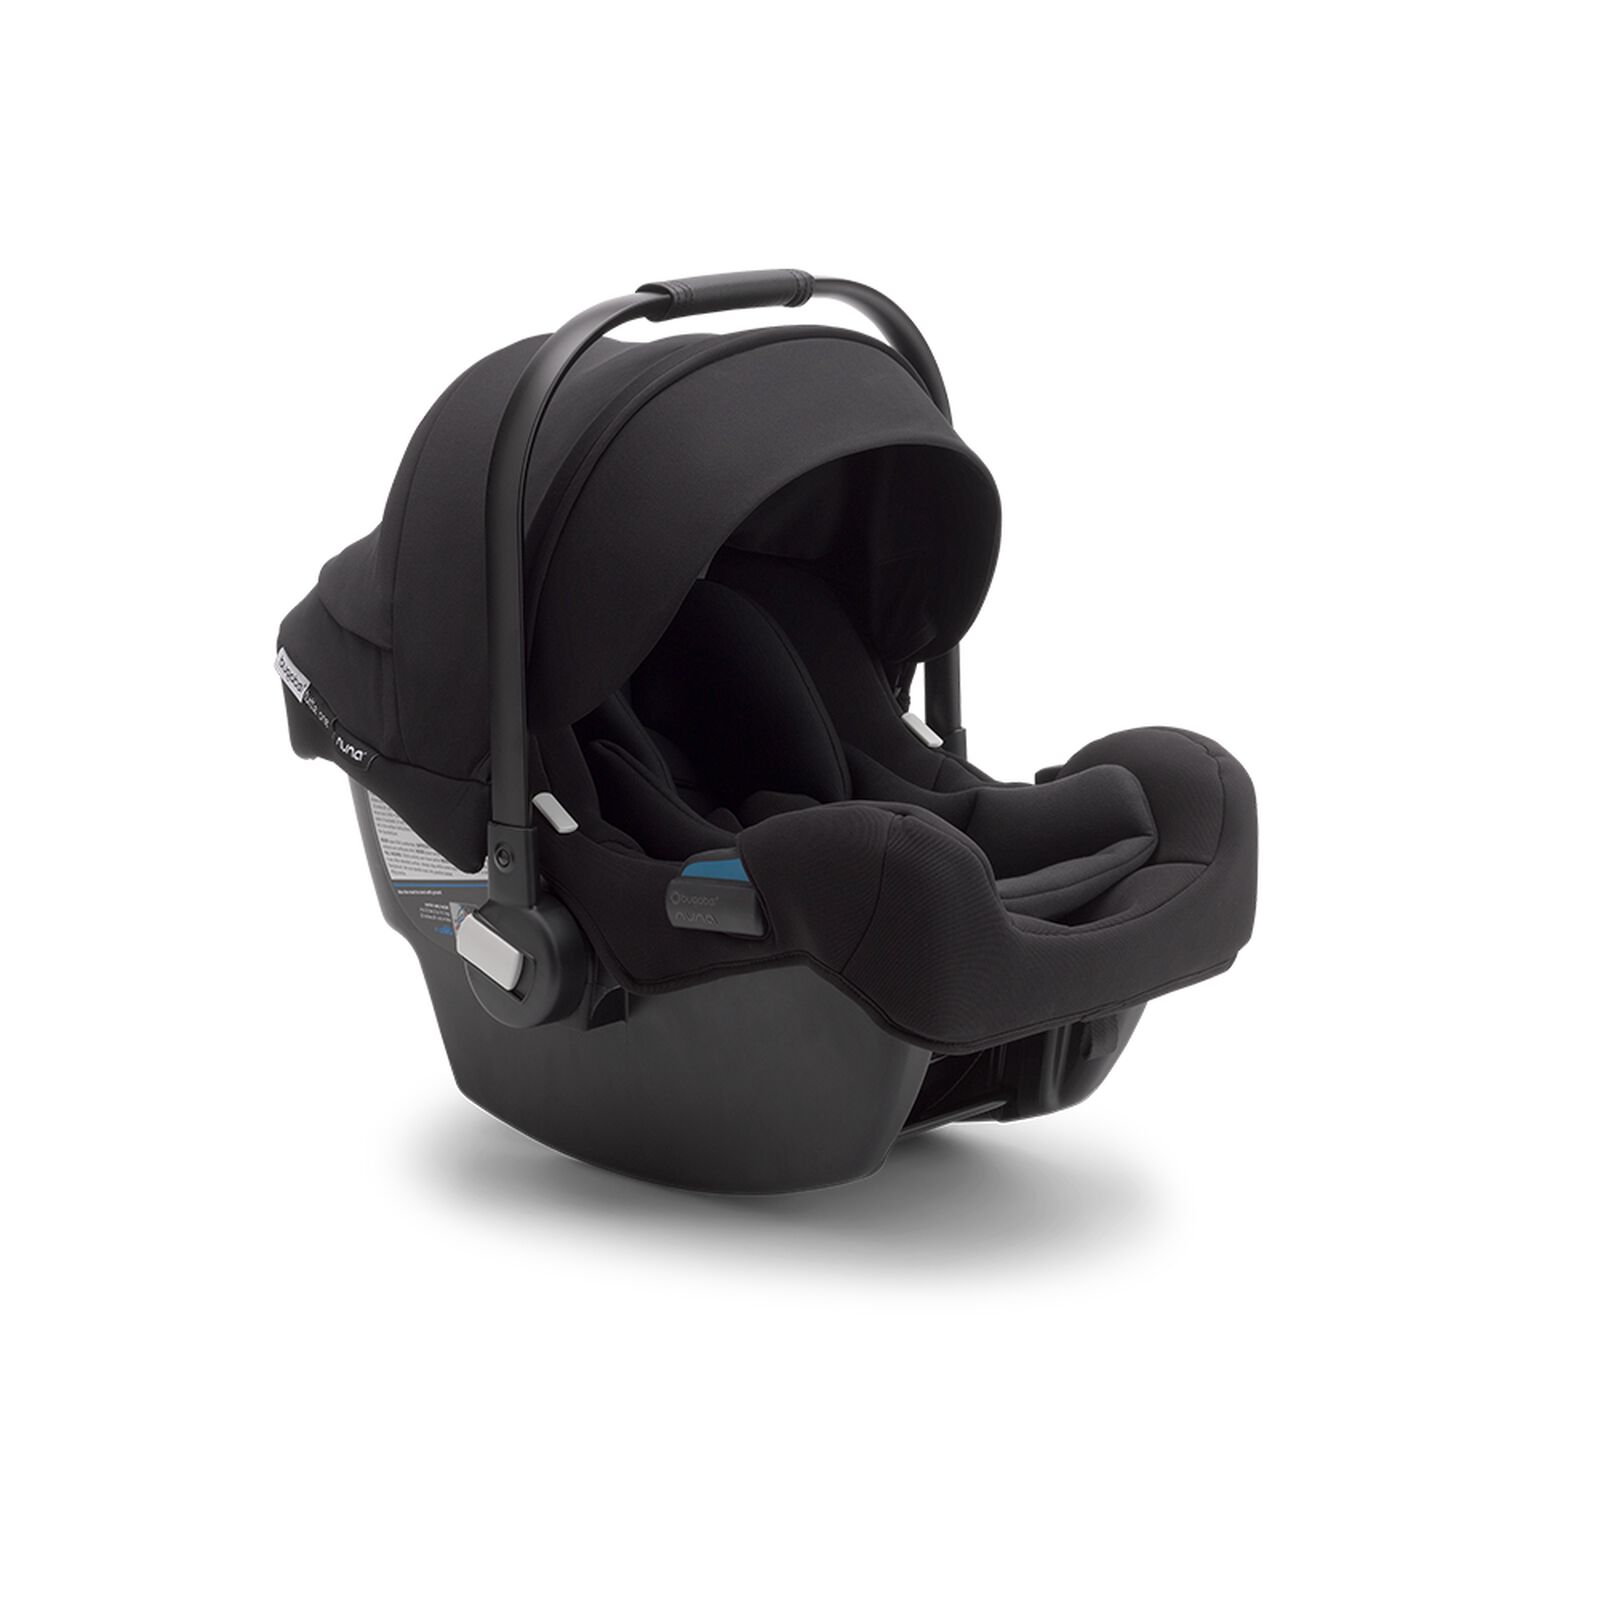 Bugaboo Turtle One by Nuna car seat with base - View 2